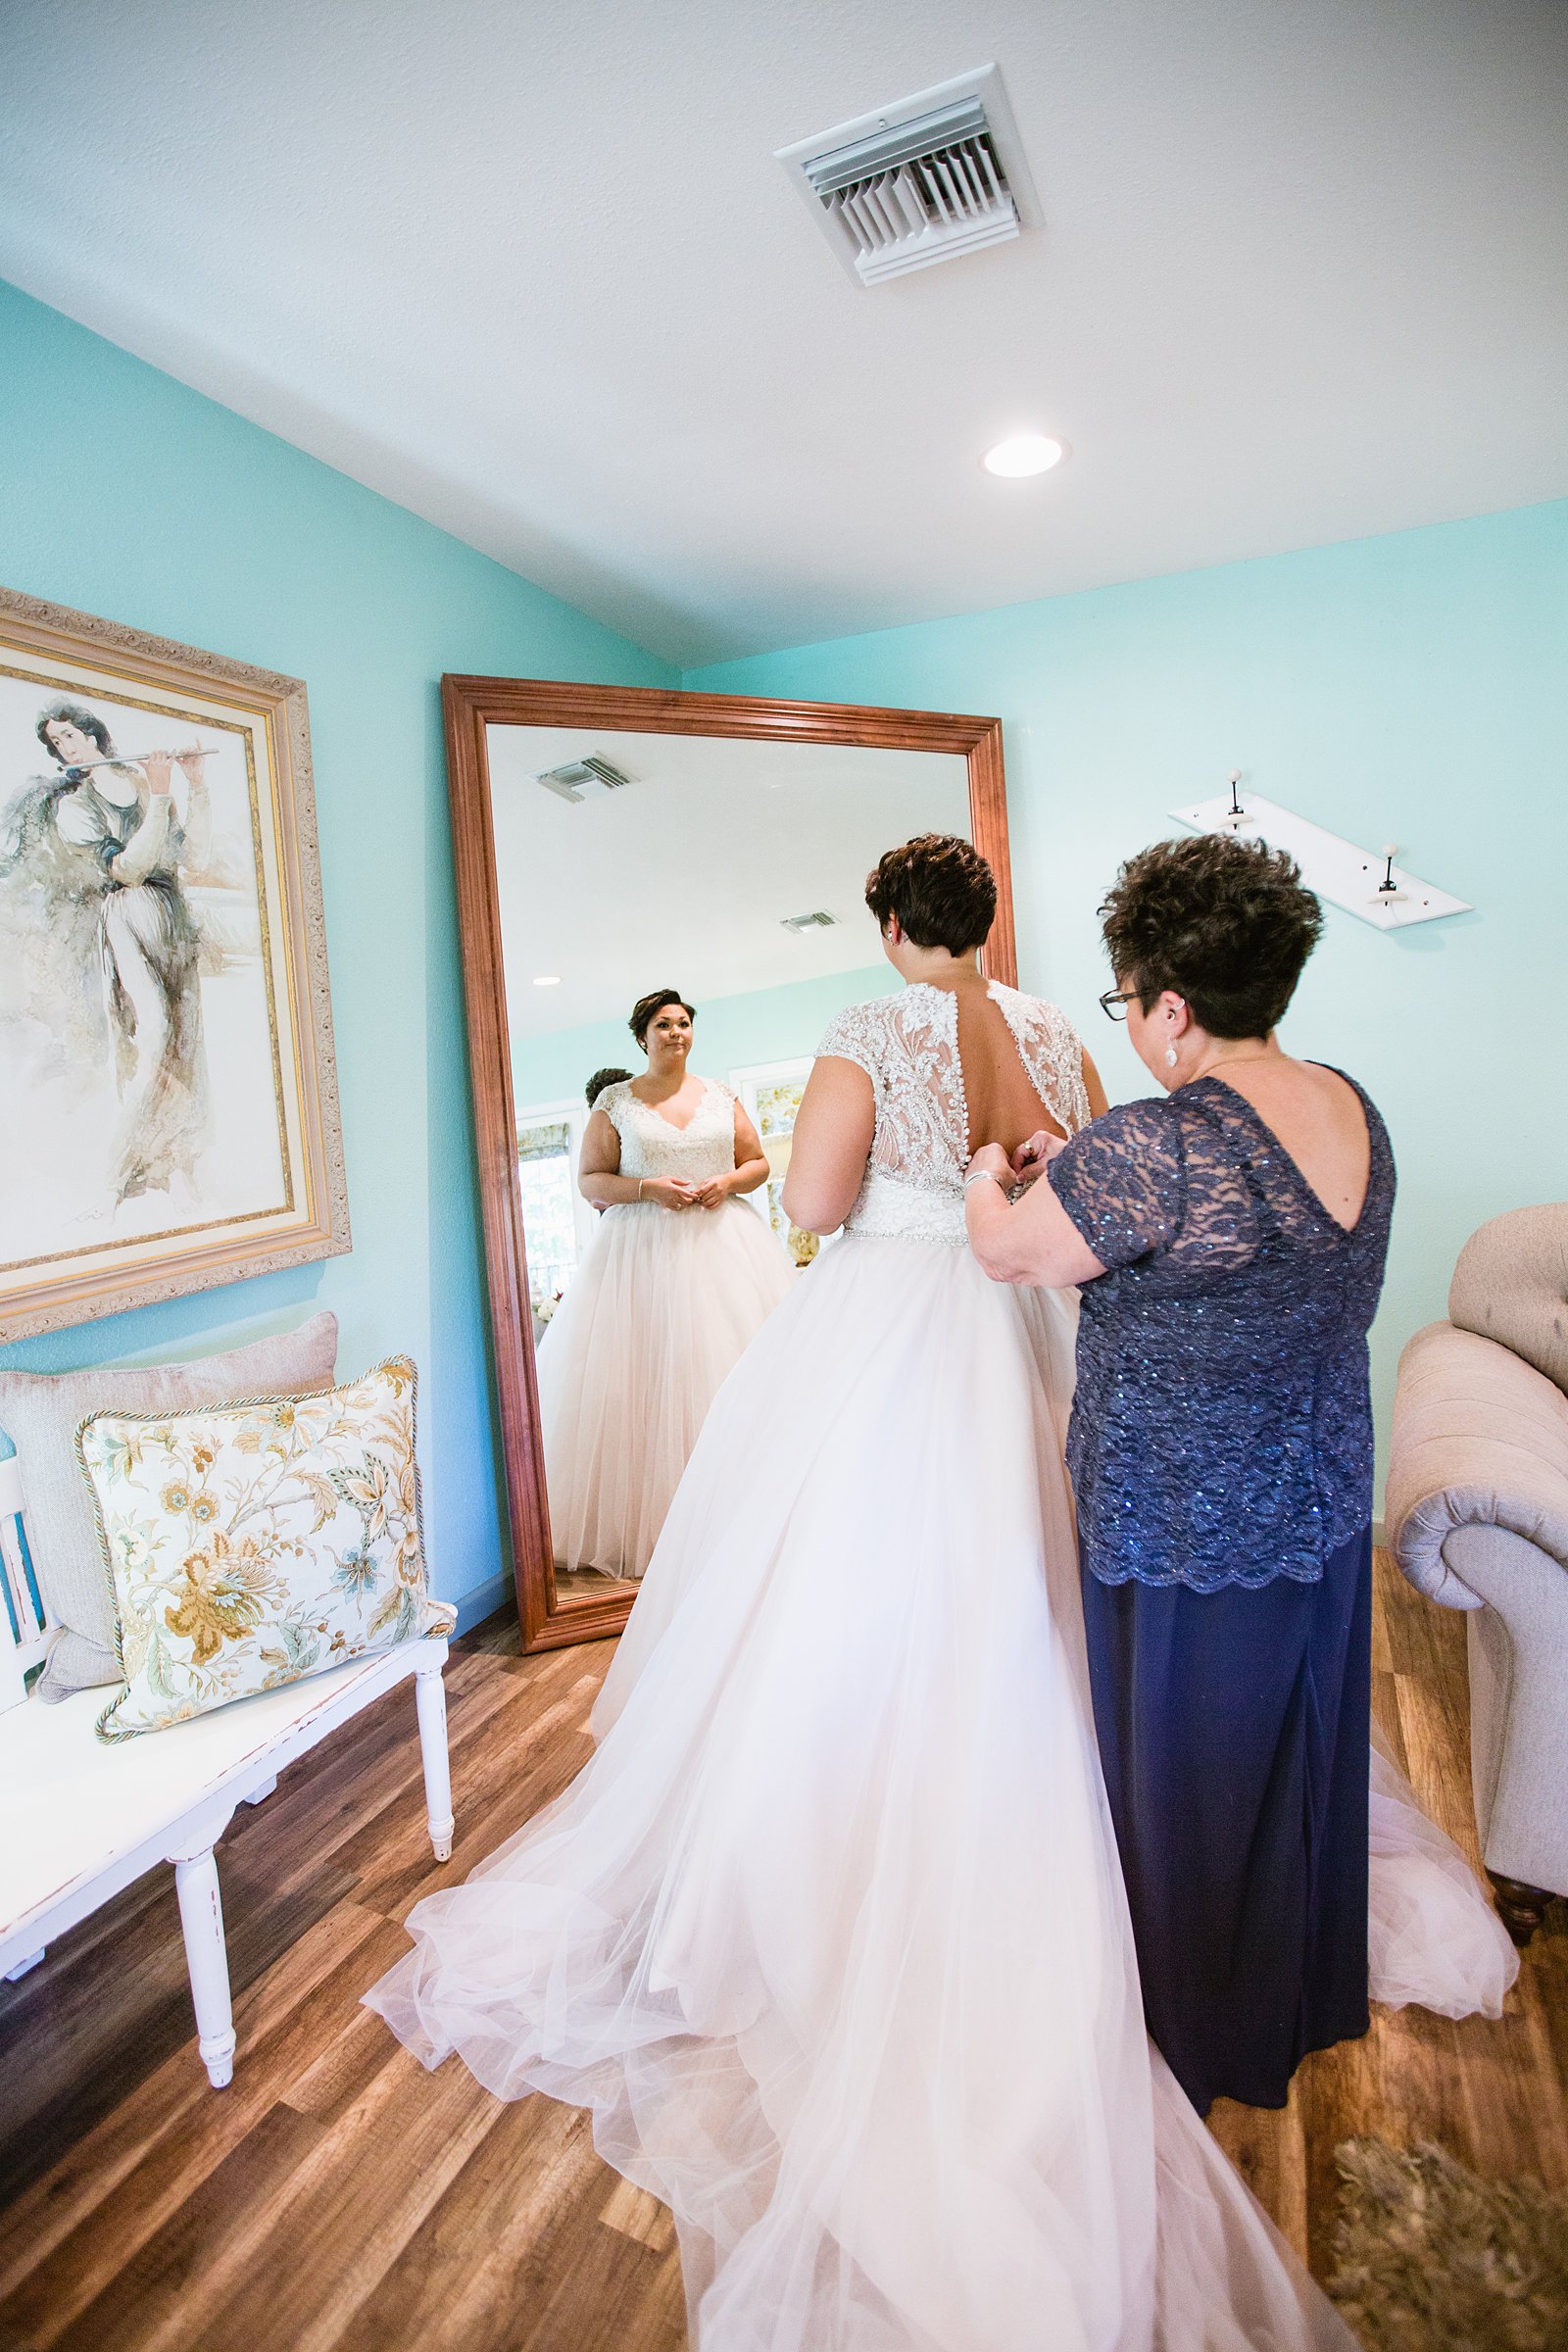 Bride putting on her wedding dress at the Windmill Winery venue bridal suite by PMA Photography.